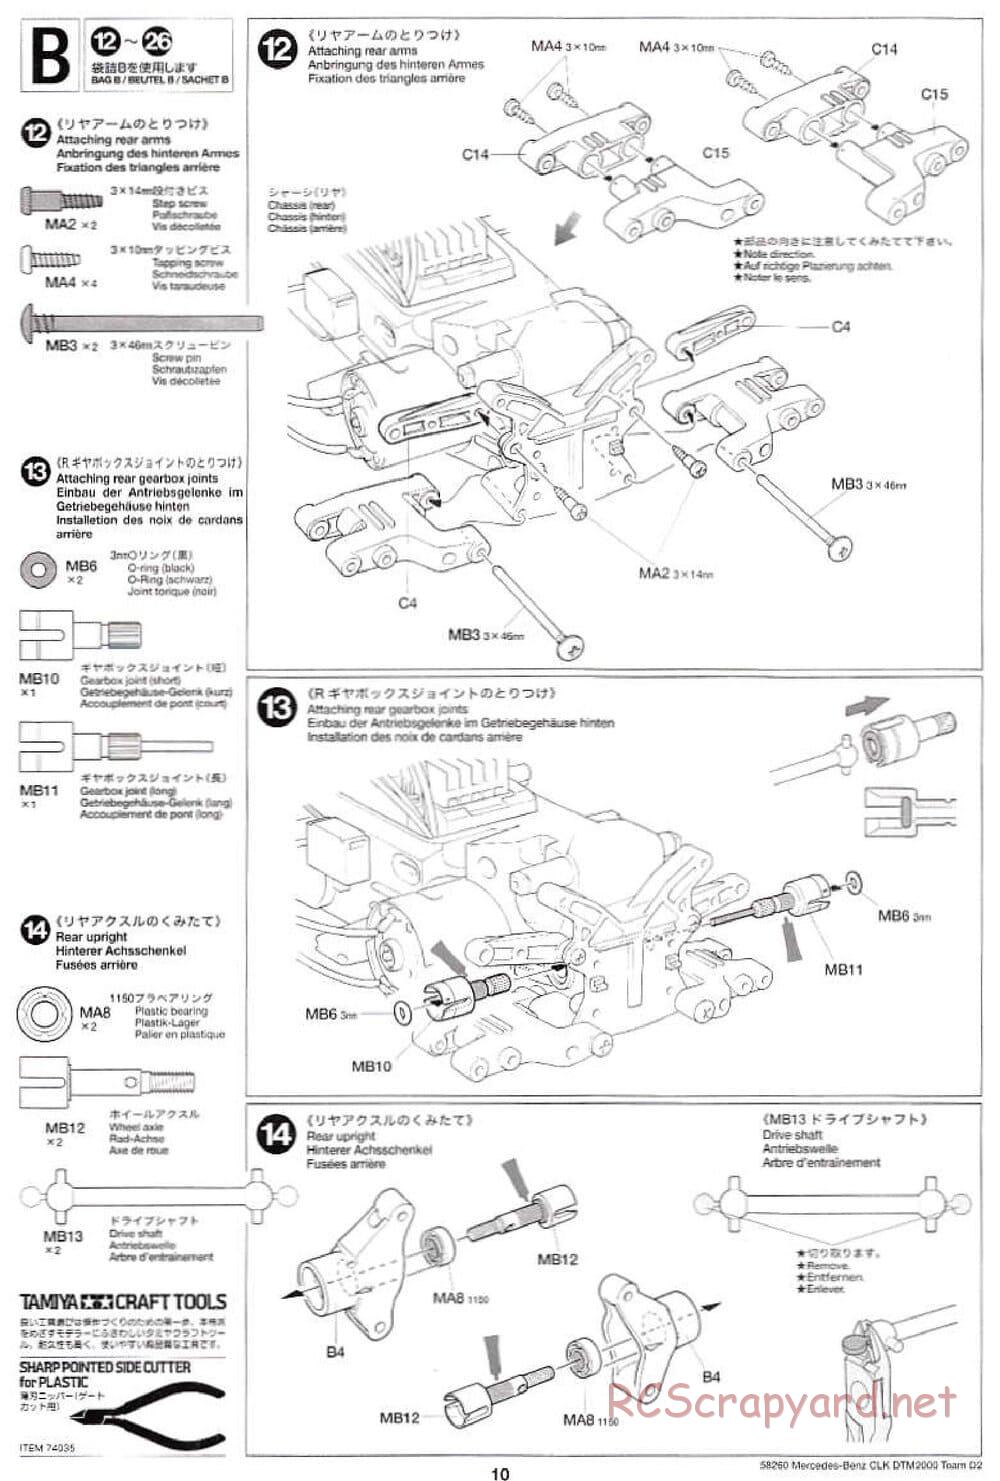 Tamiya - Mercedes Benz CLK DTM 2000 Team D2 - TL-01 Chassis - Manual - Page 10